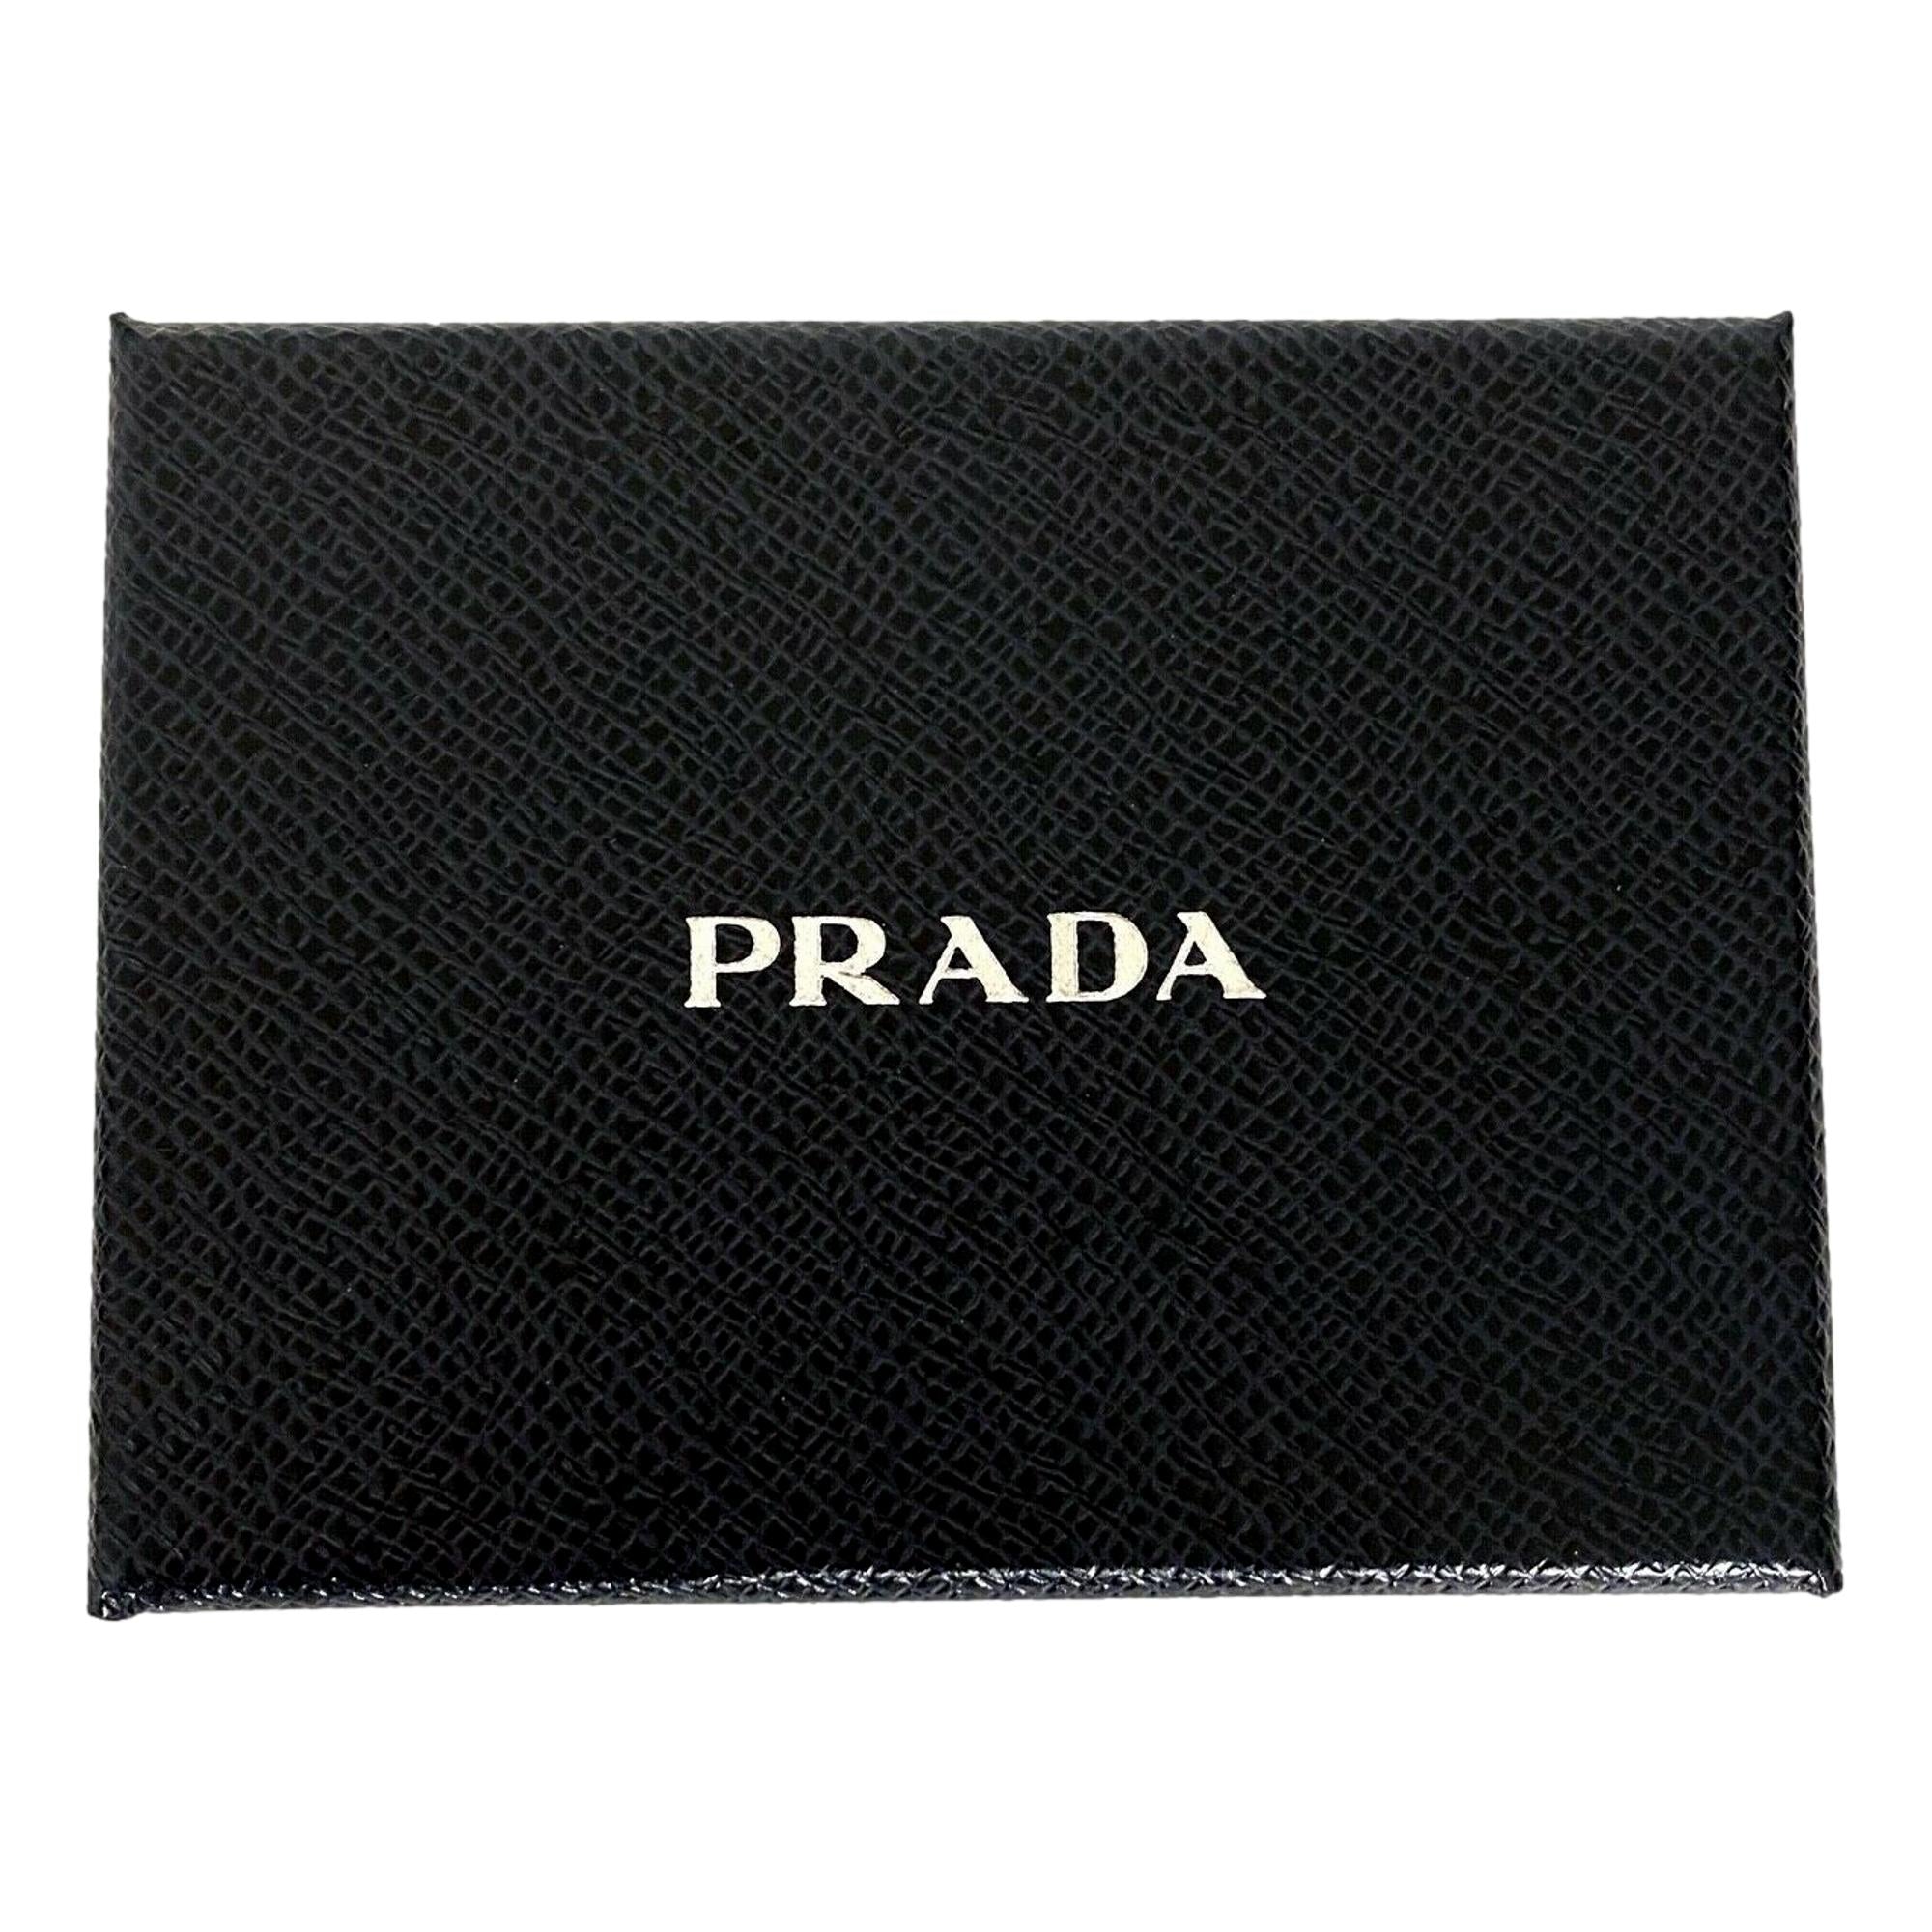 Prada Black Saffiano Leather Credit Card Case Wallet at_Queen_Bee_of_Beverly_Hills